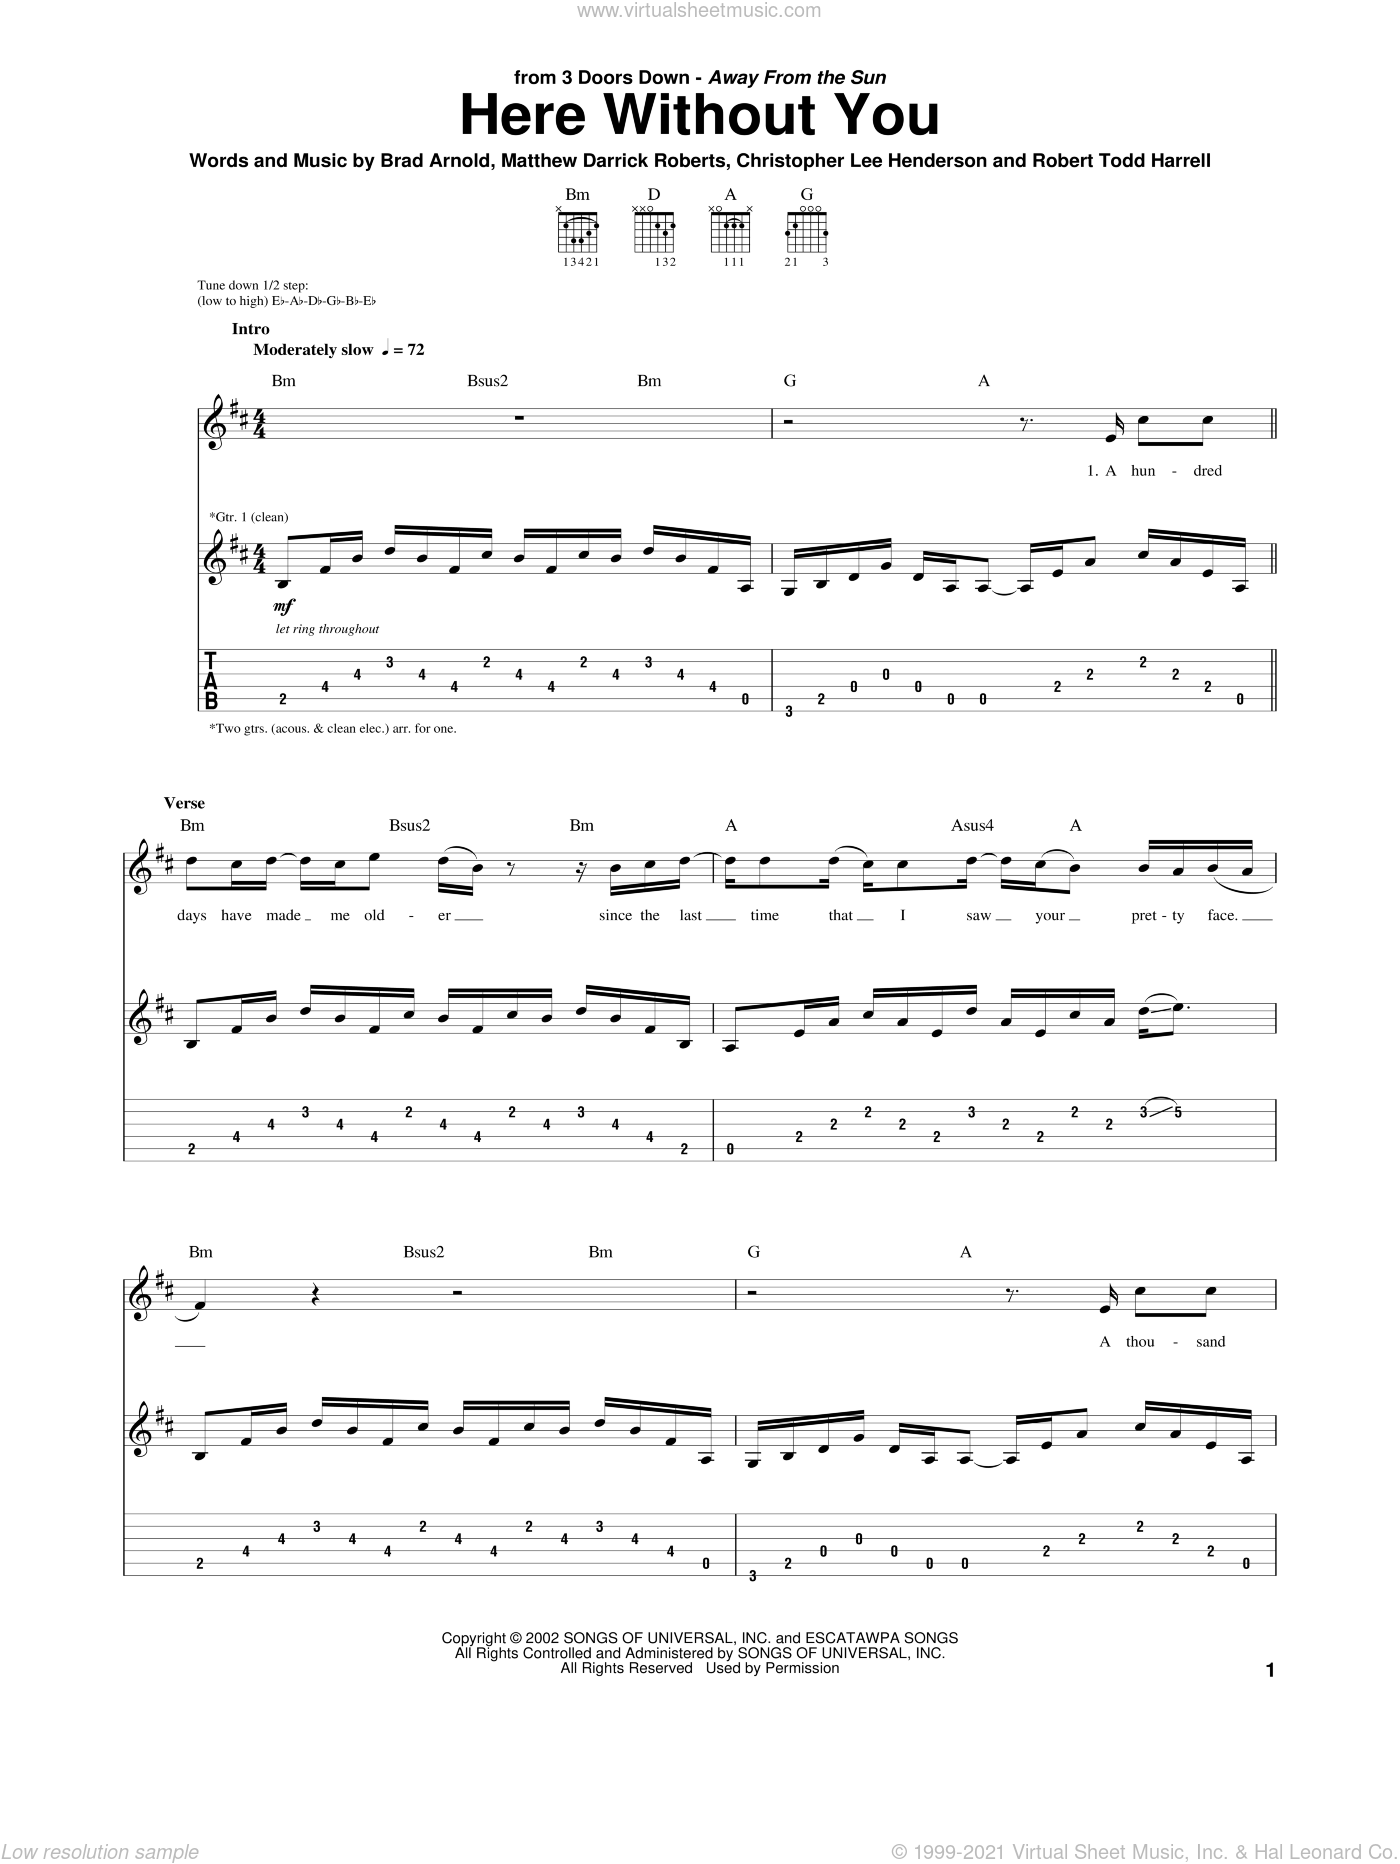 Behind Those Eyes" Sheet Music by 3 Doors Down for Guitar Tab - Sheet  Music Now